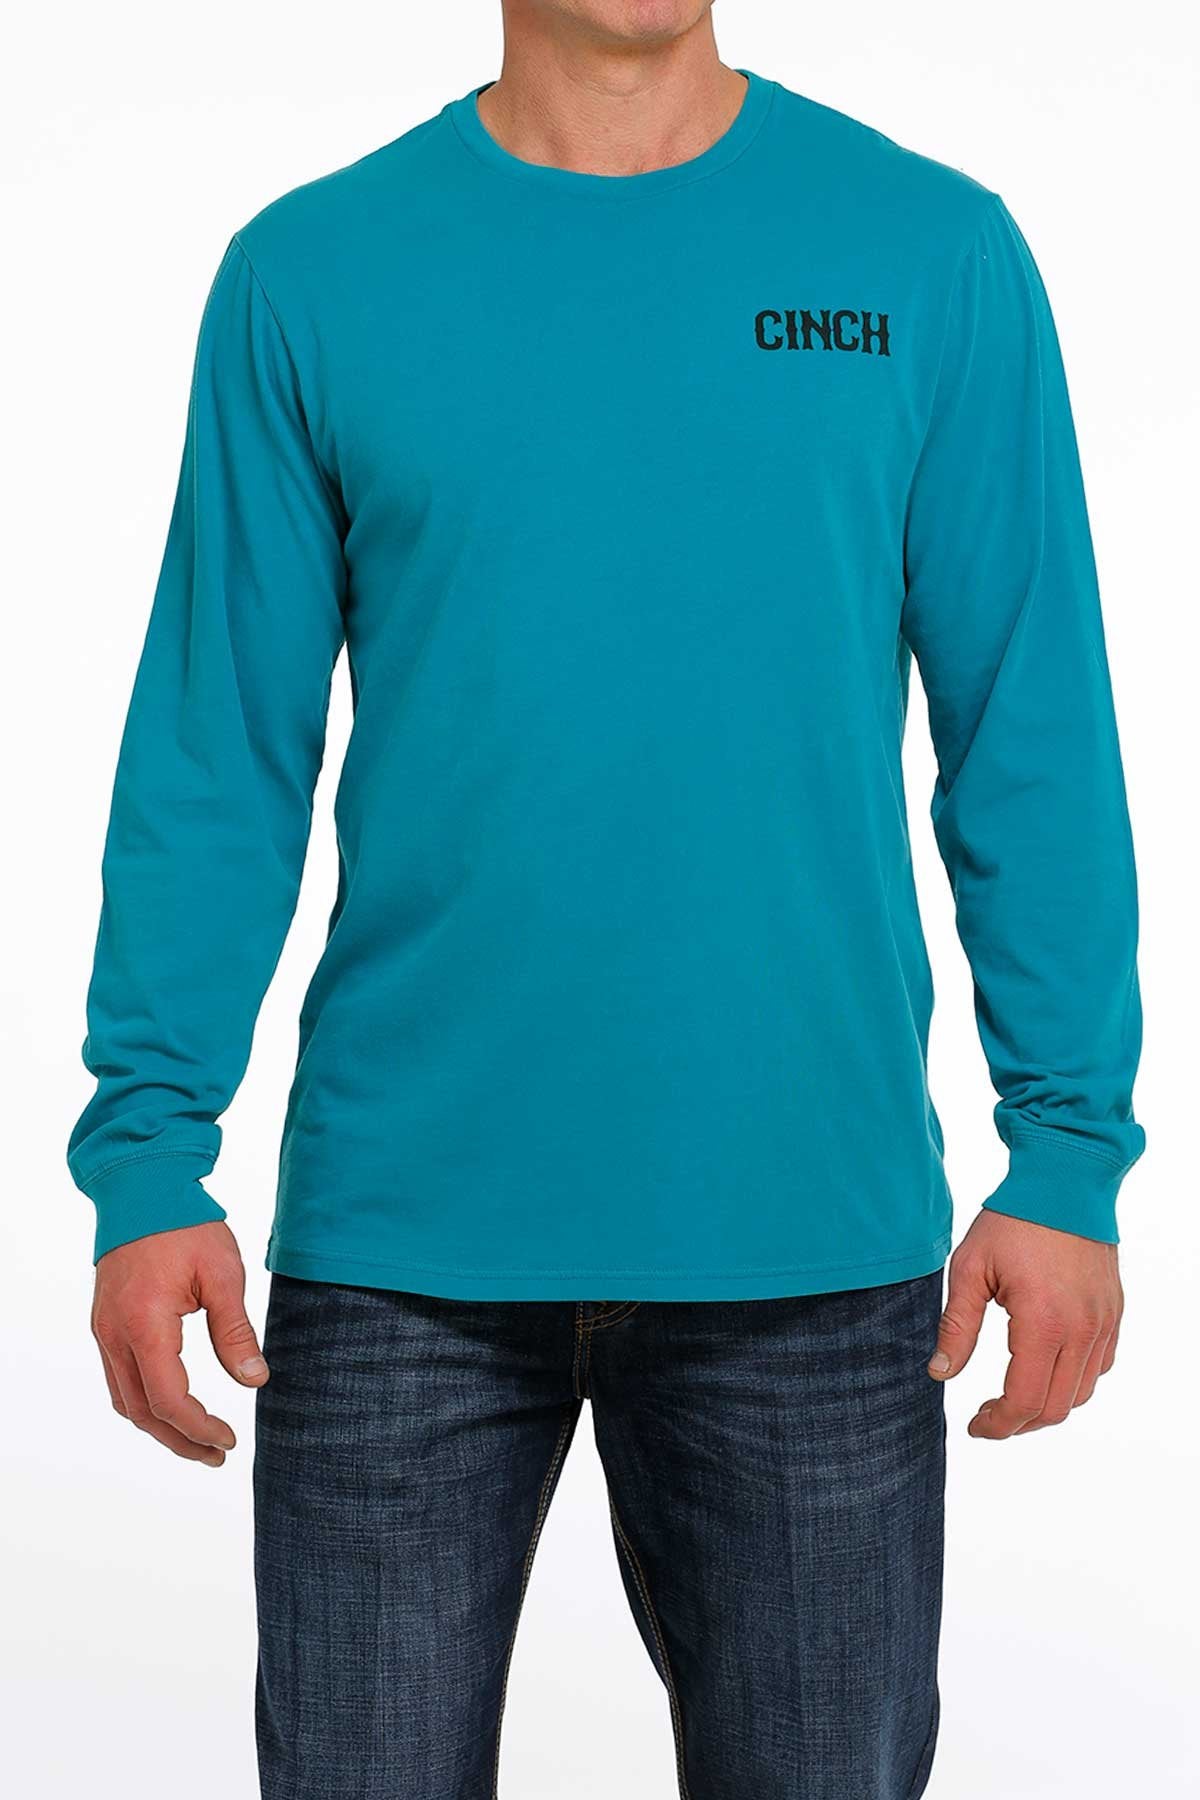 Cinch Denim Co. "Lead This Life" Long Sleeve Graphic T-Shirt - Teal